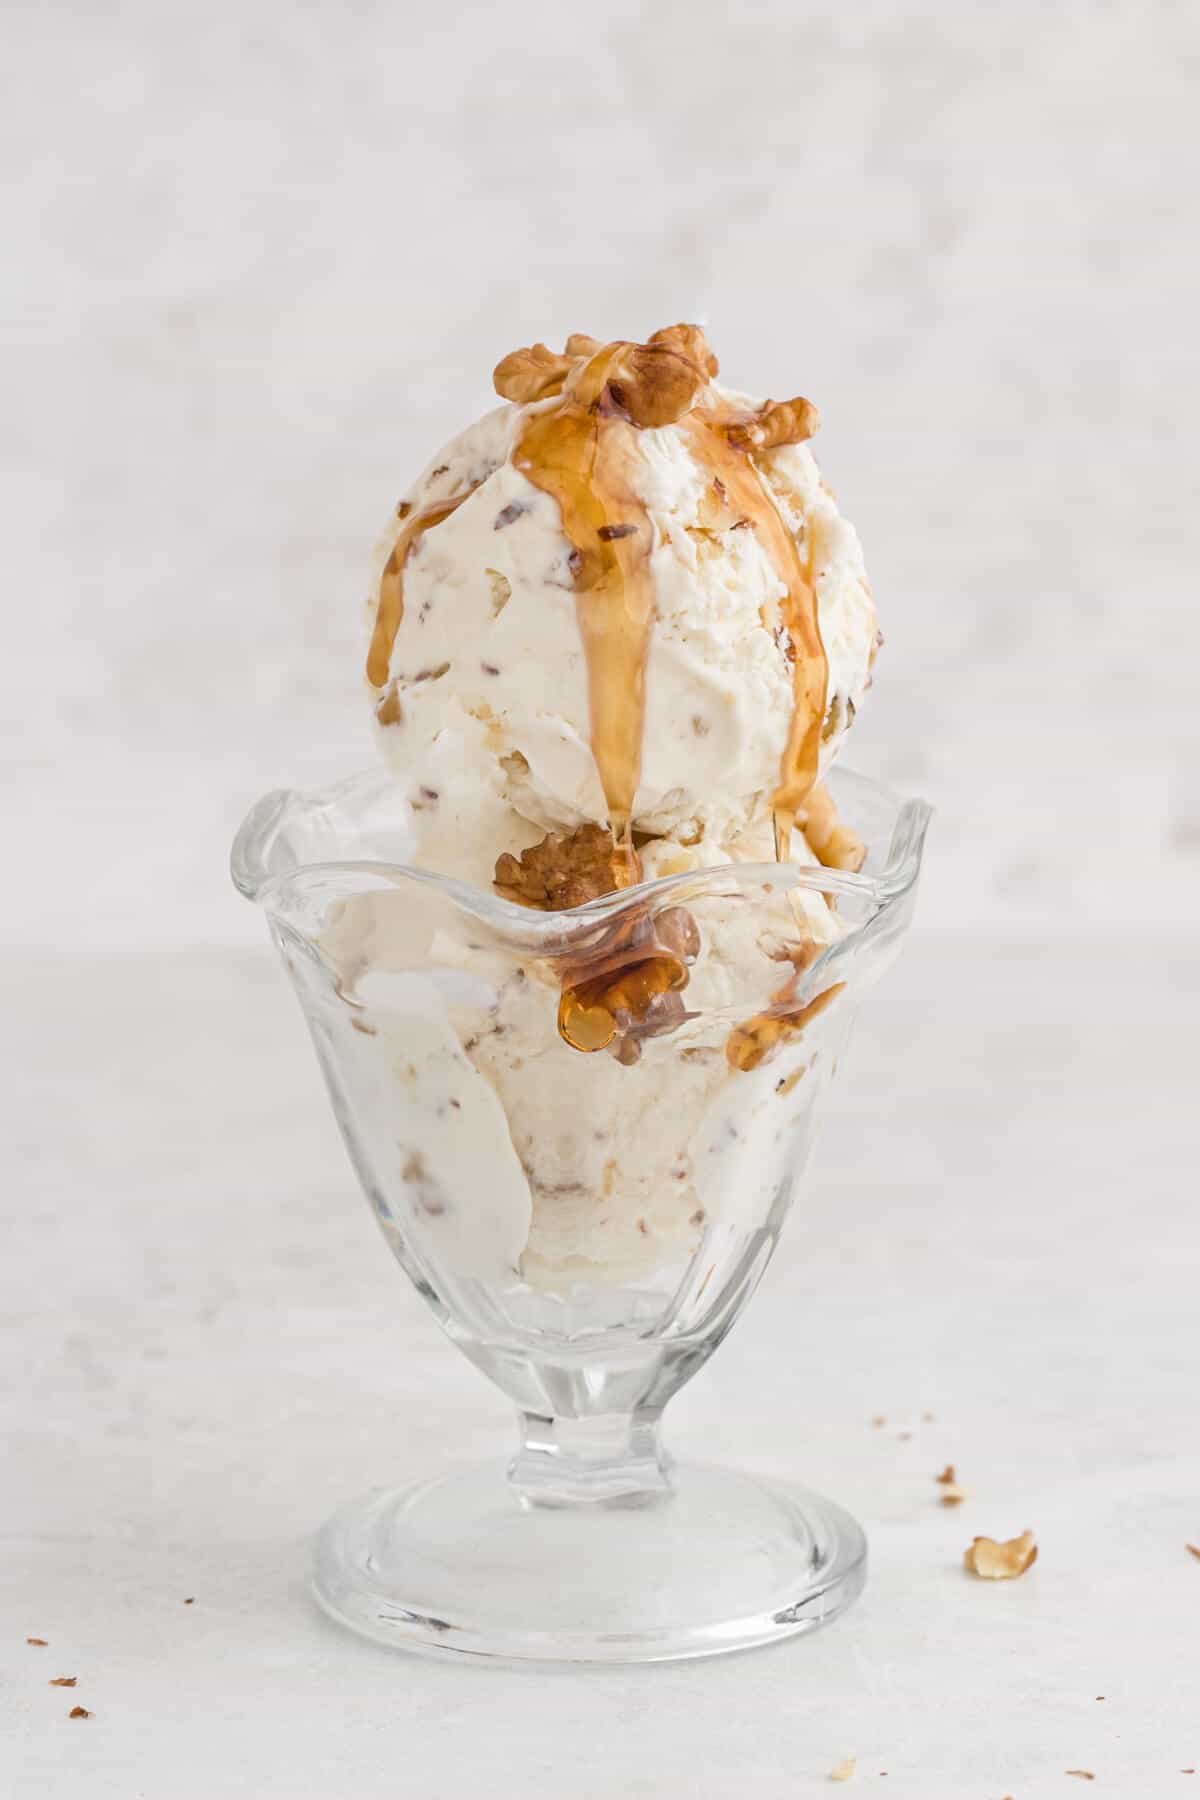 Maple walnut ice cream in a parfait dish with maple syrup on top.